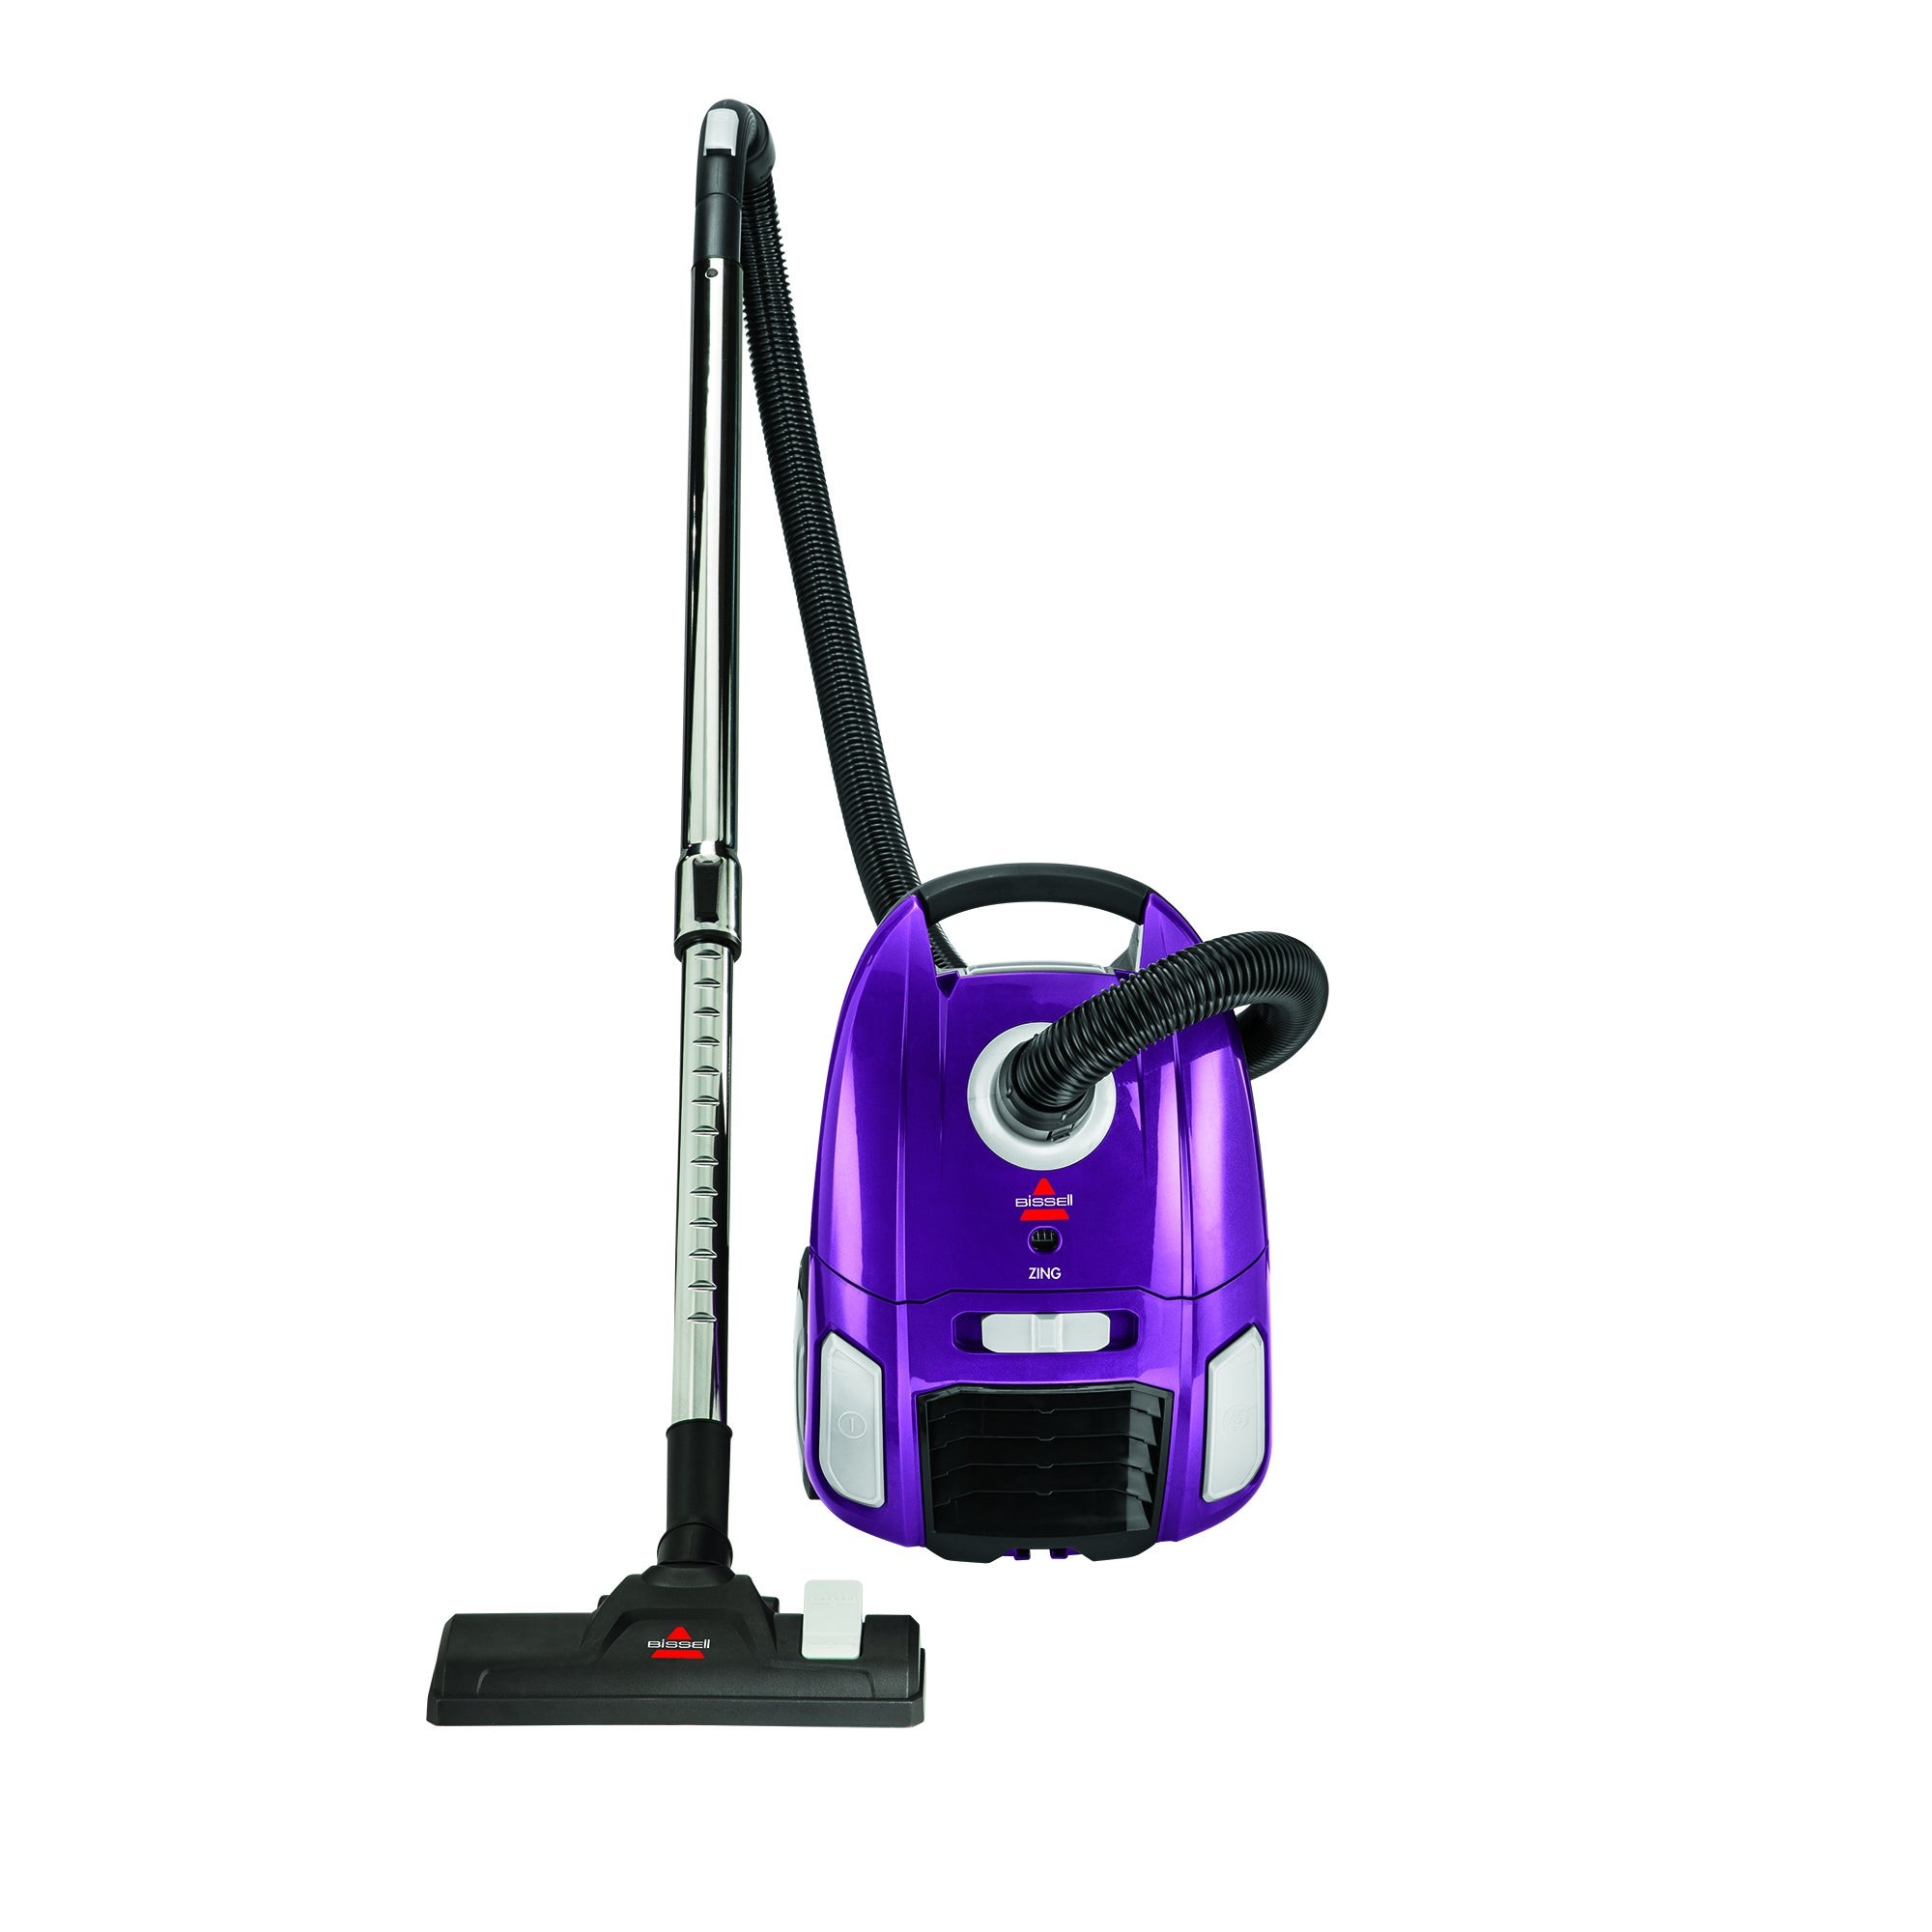 Zing Bagged Canister Vacuum w/ Multi-Level Filtration System